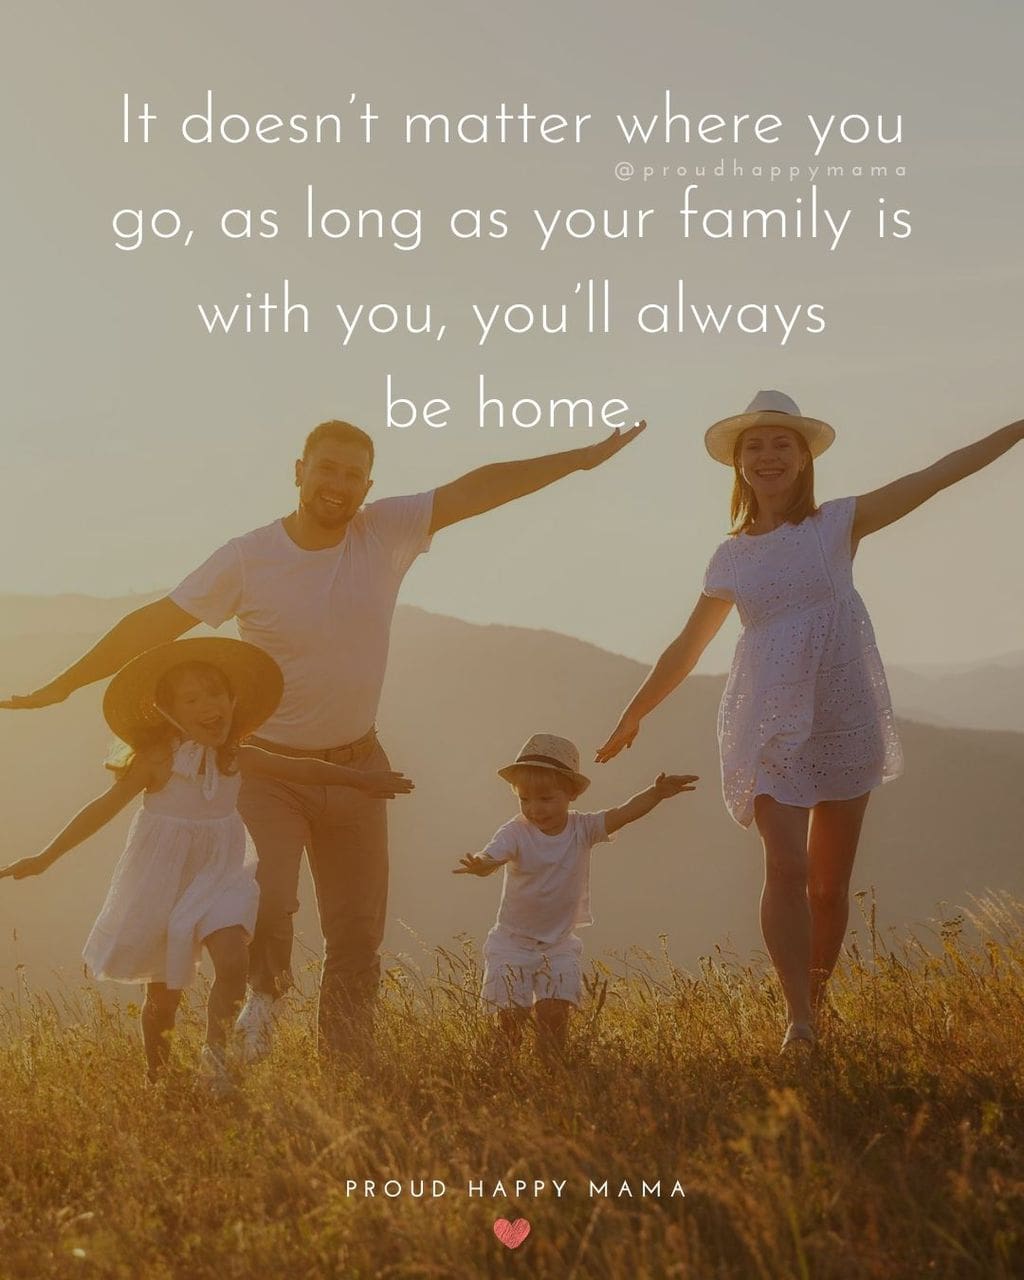 Quotes About Loving Family | It doesn’t matter where you go, as long as your family is with you, you’ll always be home.